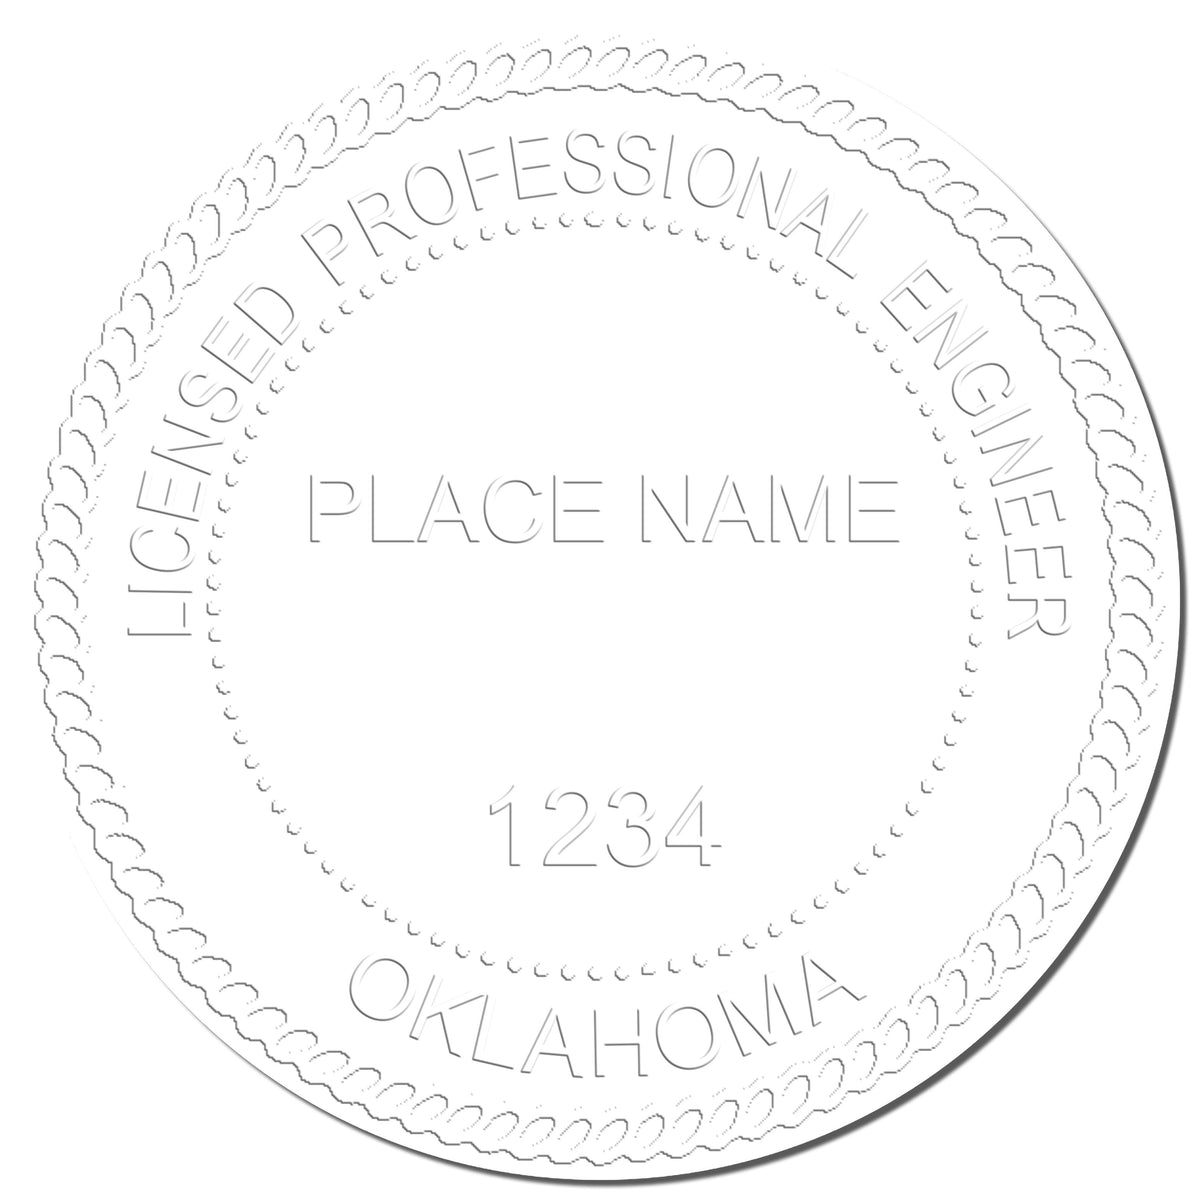 The Soft Oklahoma Professional Engineer Seal stamp impression comes to life with a crisp, detailed photo on paper - showcasing true professional quality.